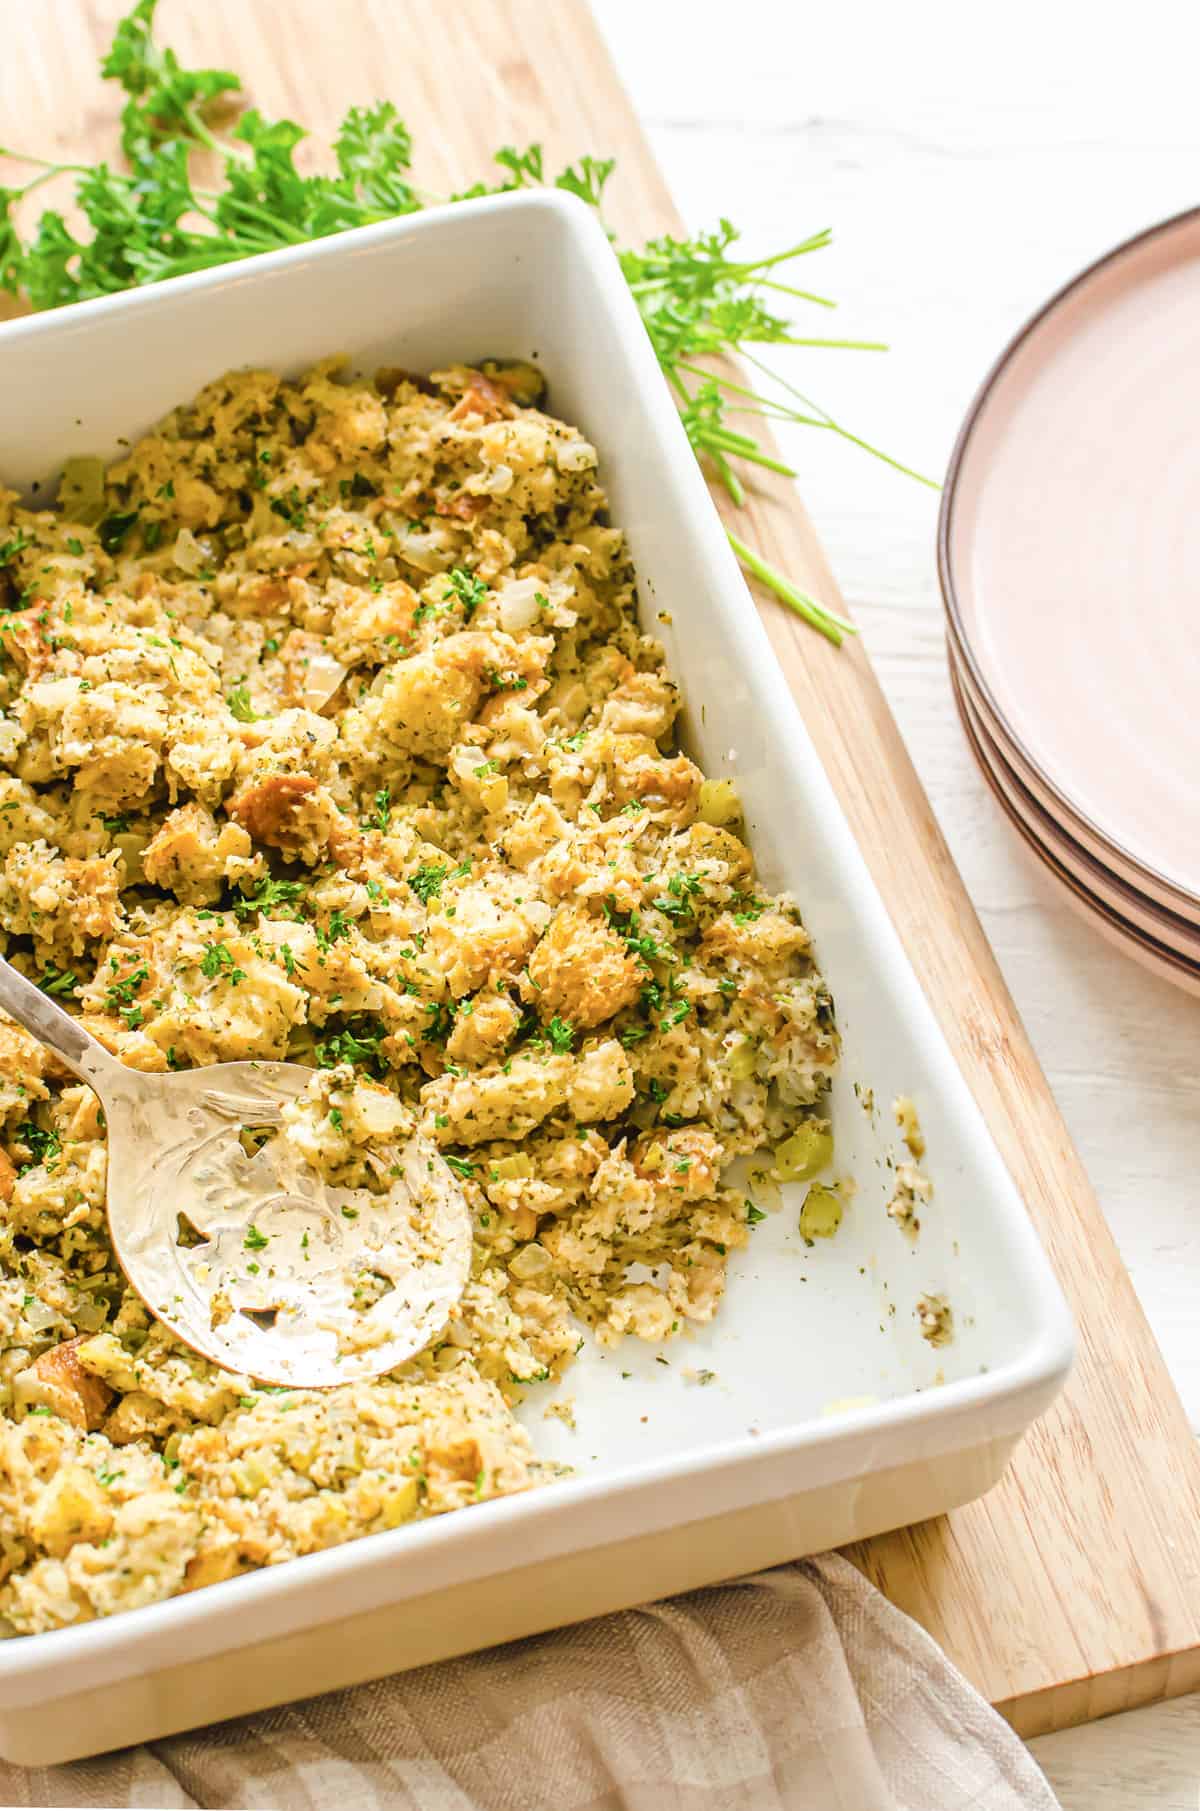 Homemade stuffing in a white casserole dish with a serving missing.